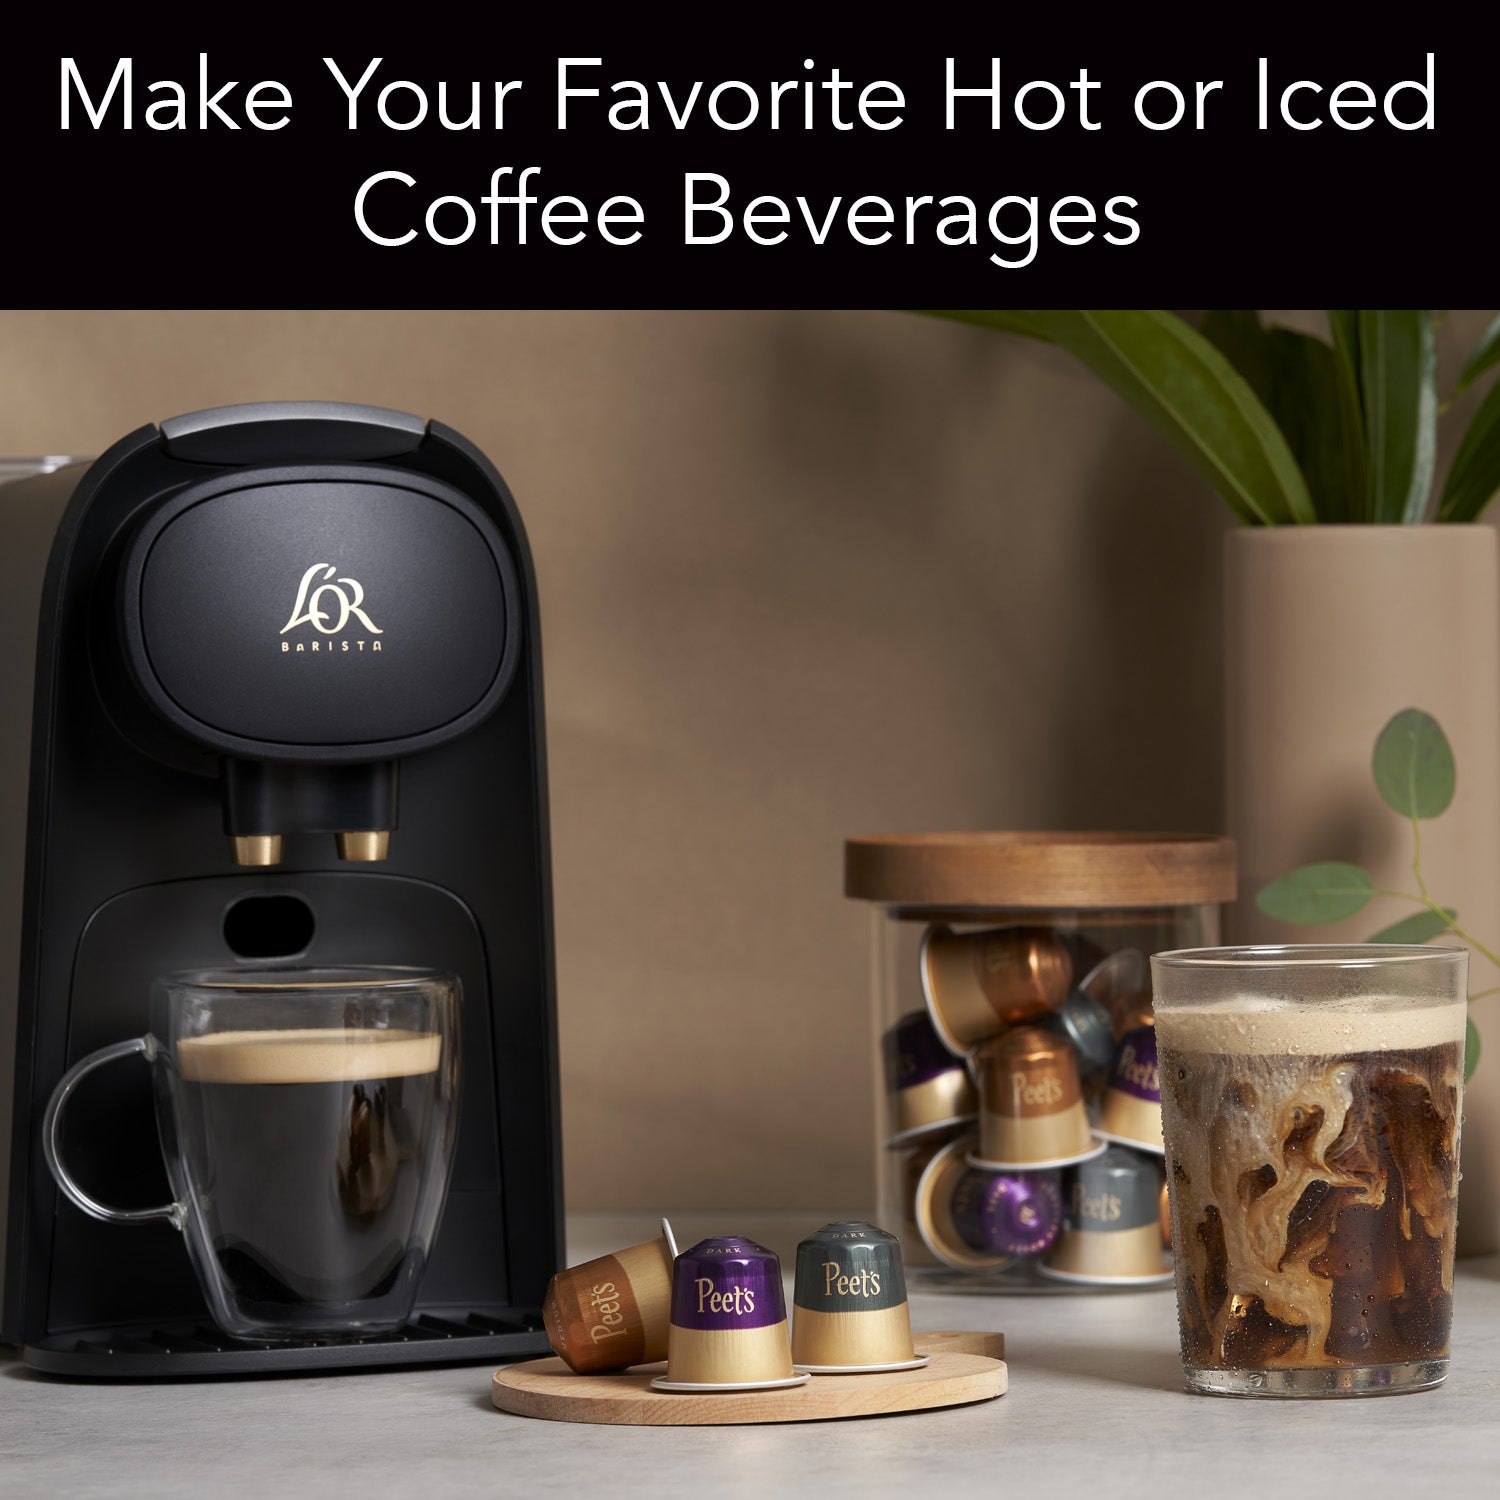 Make your favorite hot and cold coffee beverages.